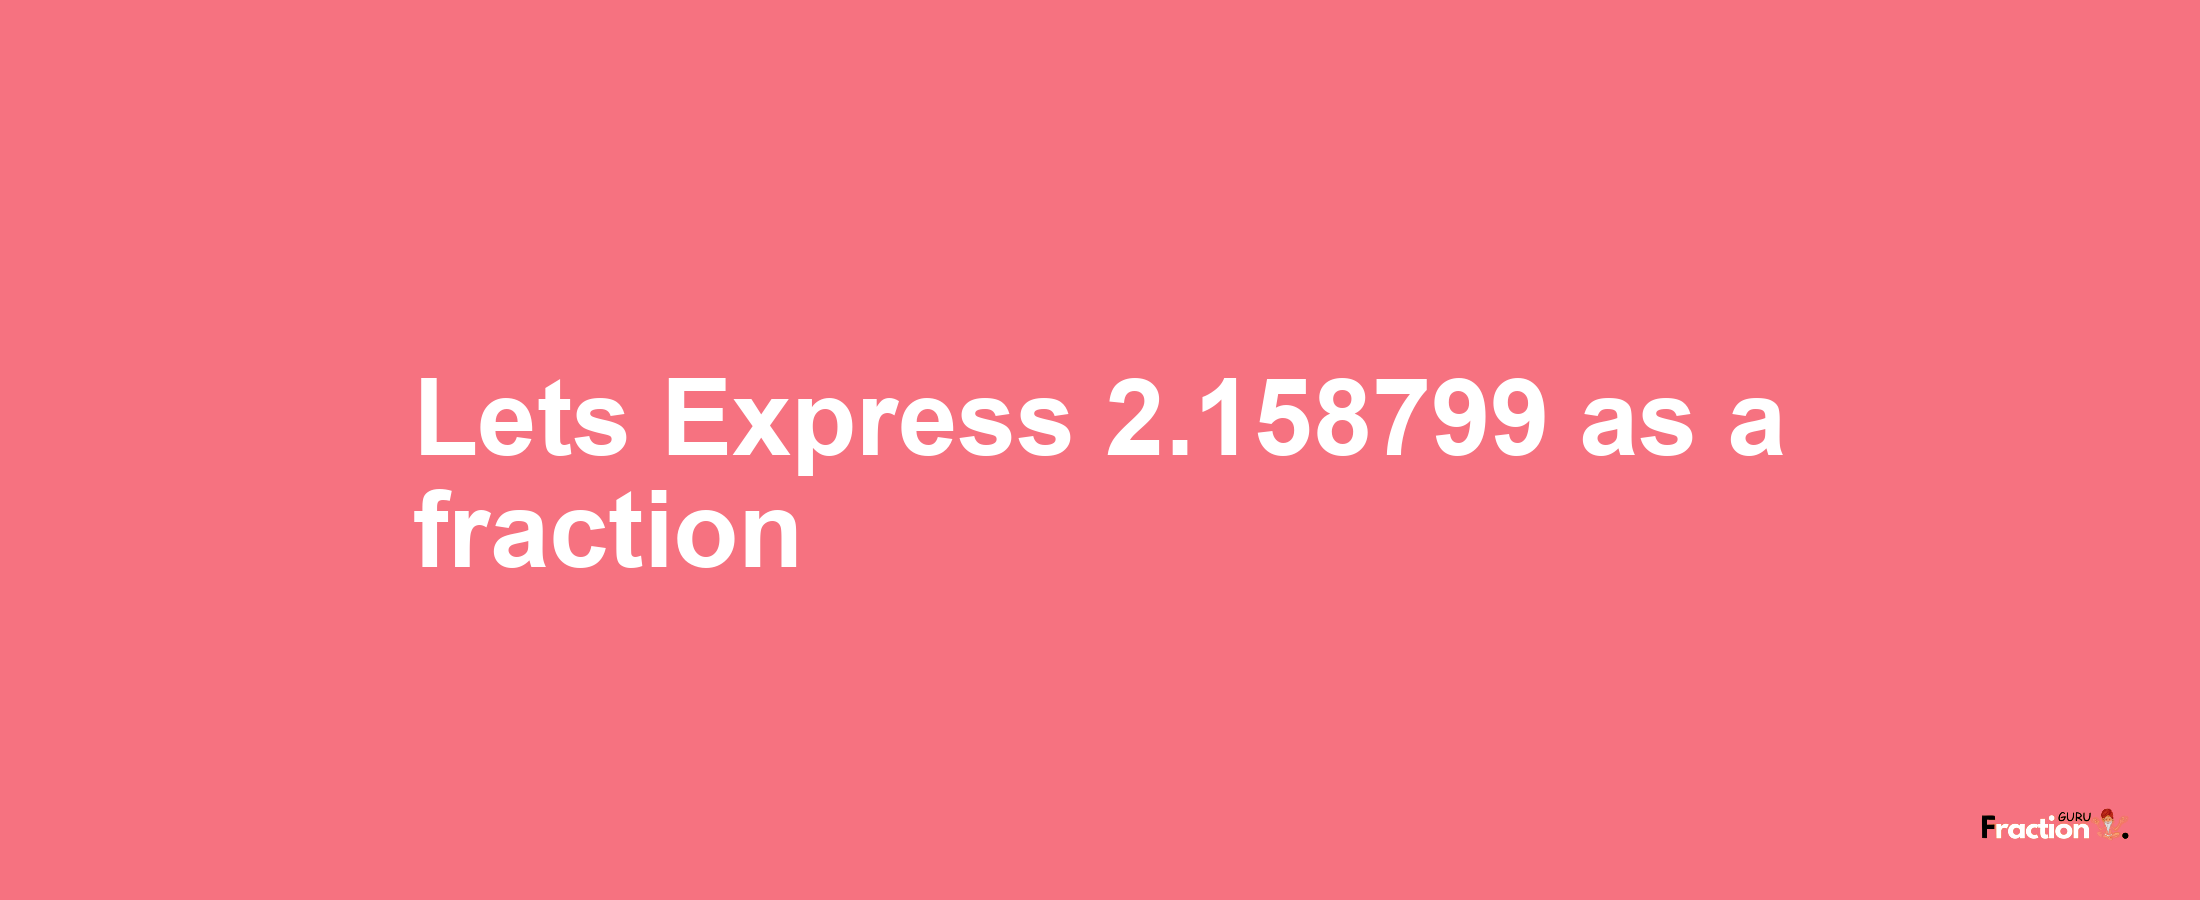 Lets Express 2.158799 as afraction